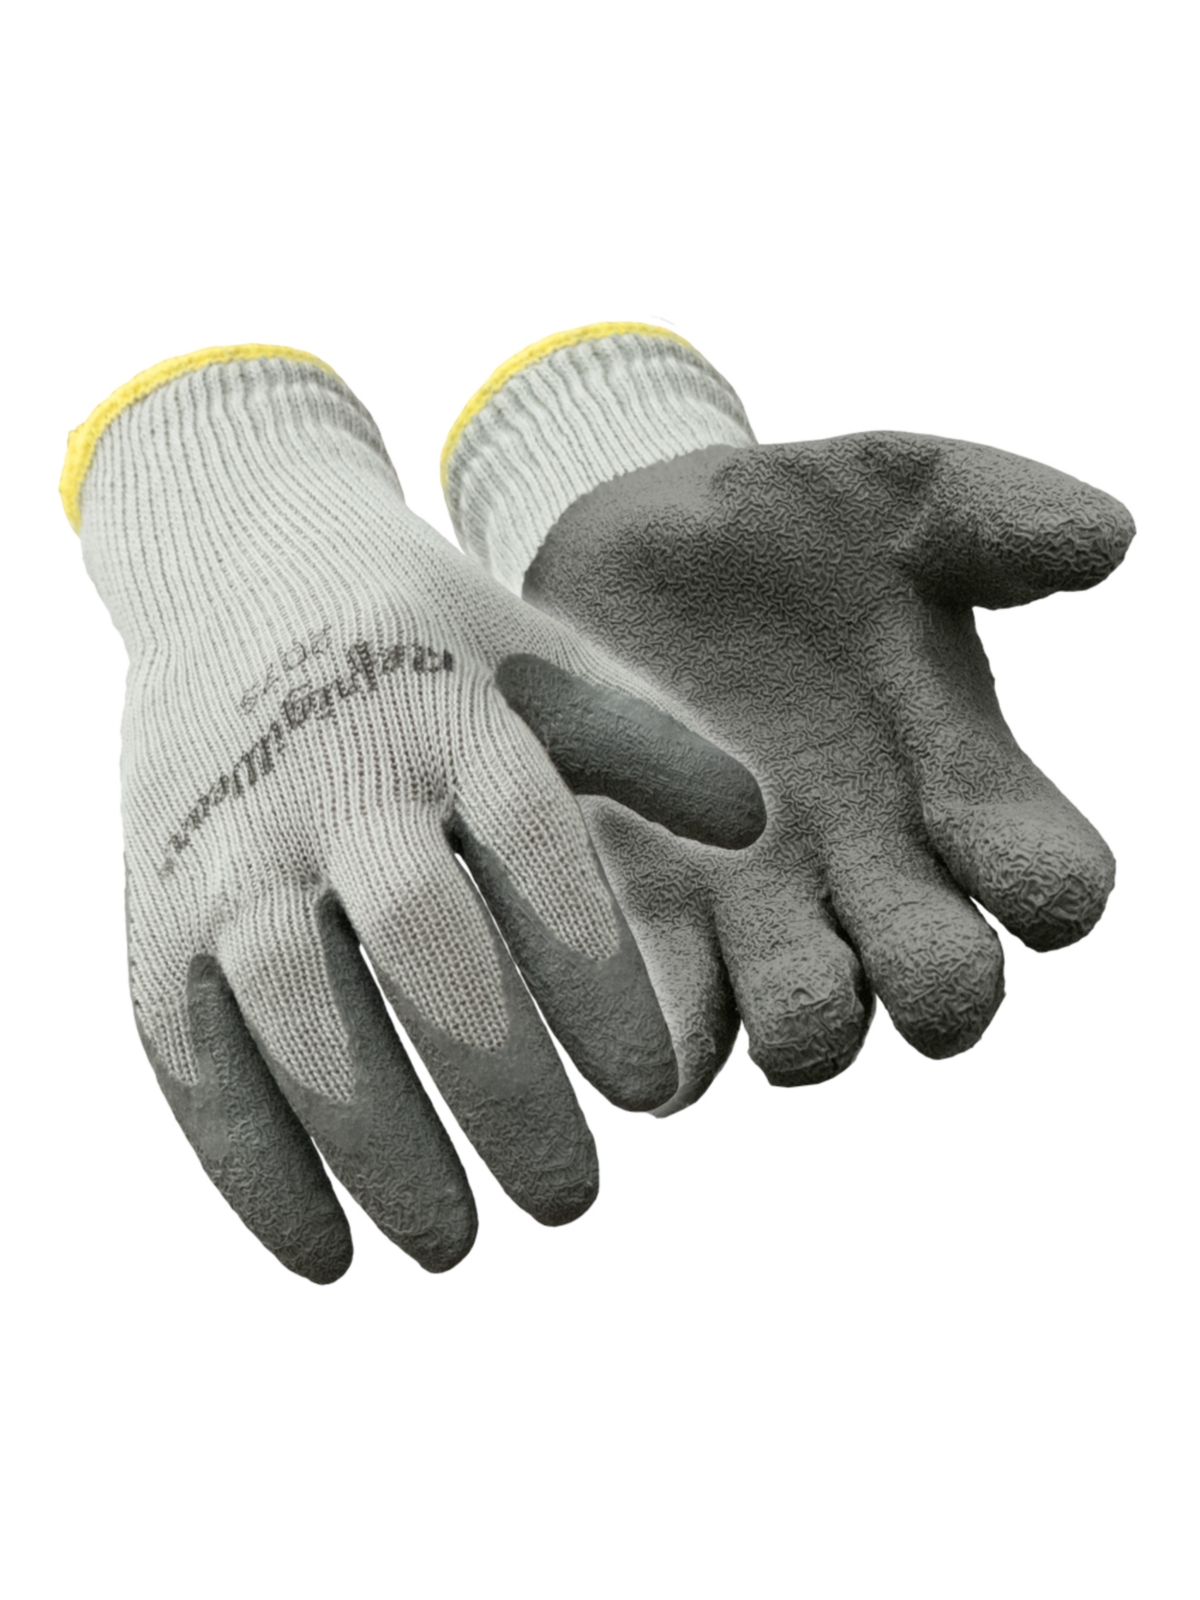 Men's Thermal Ergo Grip Crinkle Latex Palm Coated Gloves (Pack of 12 Pairs) - Grey